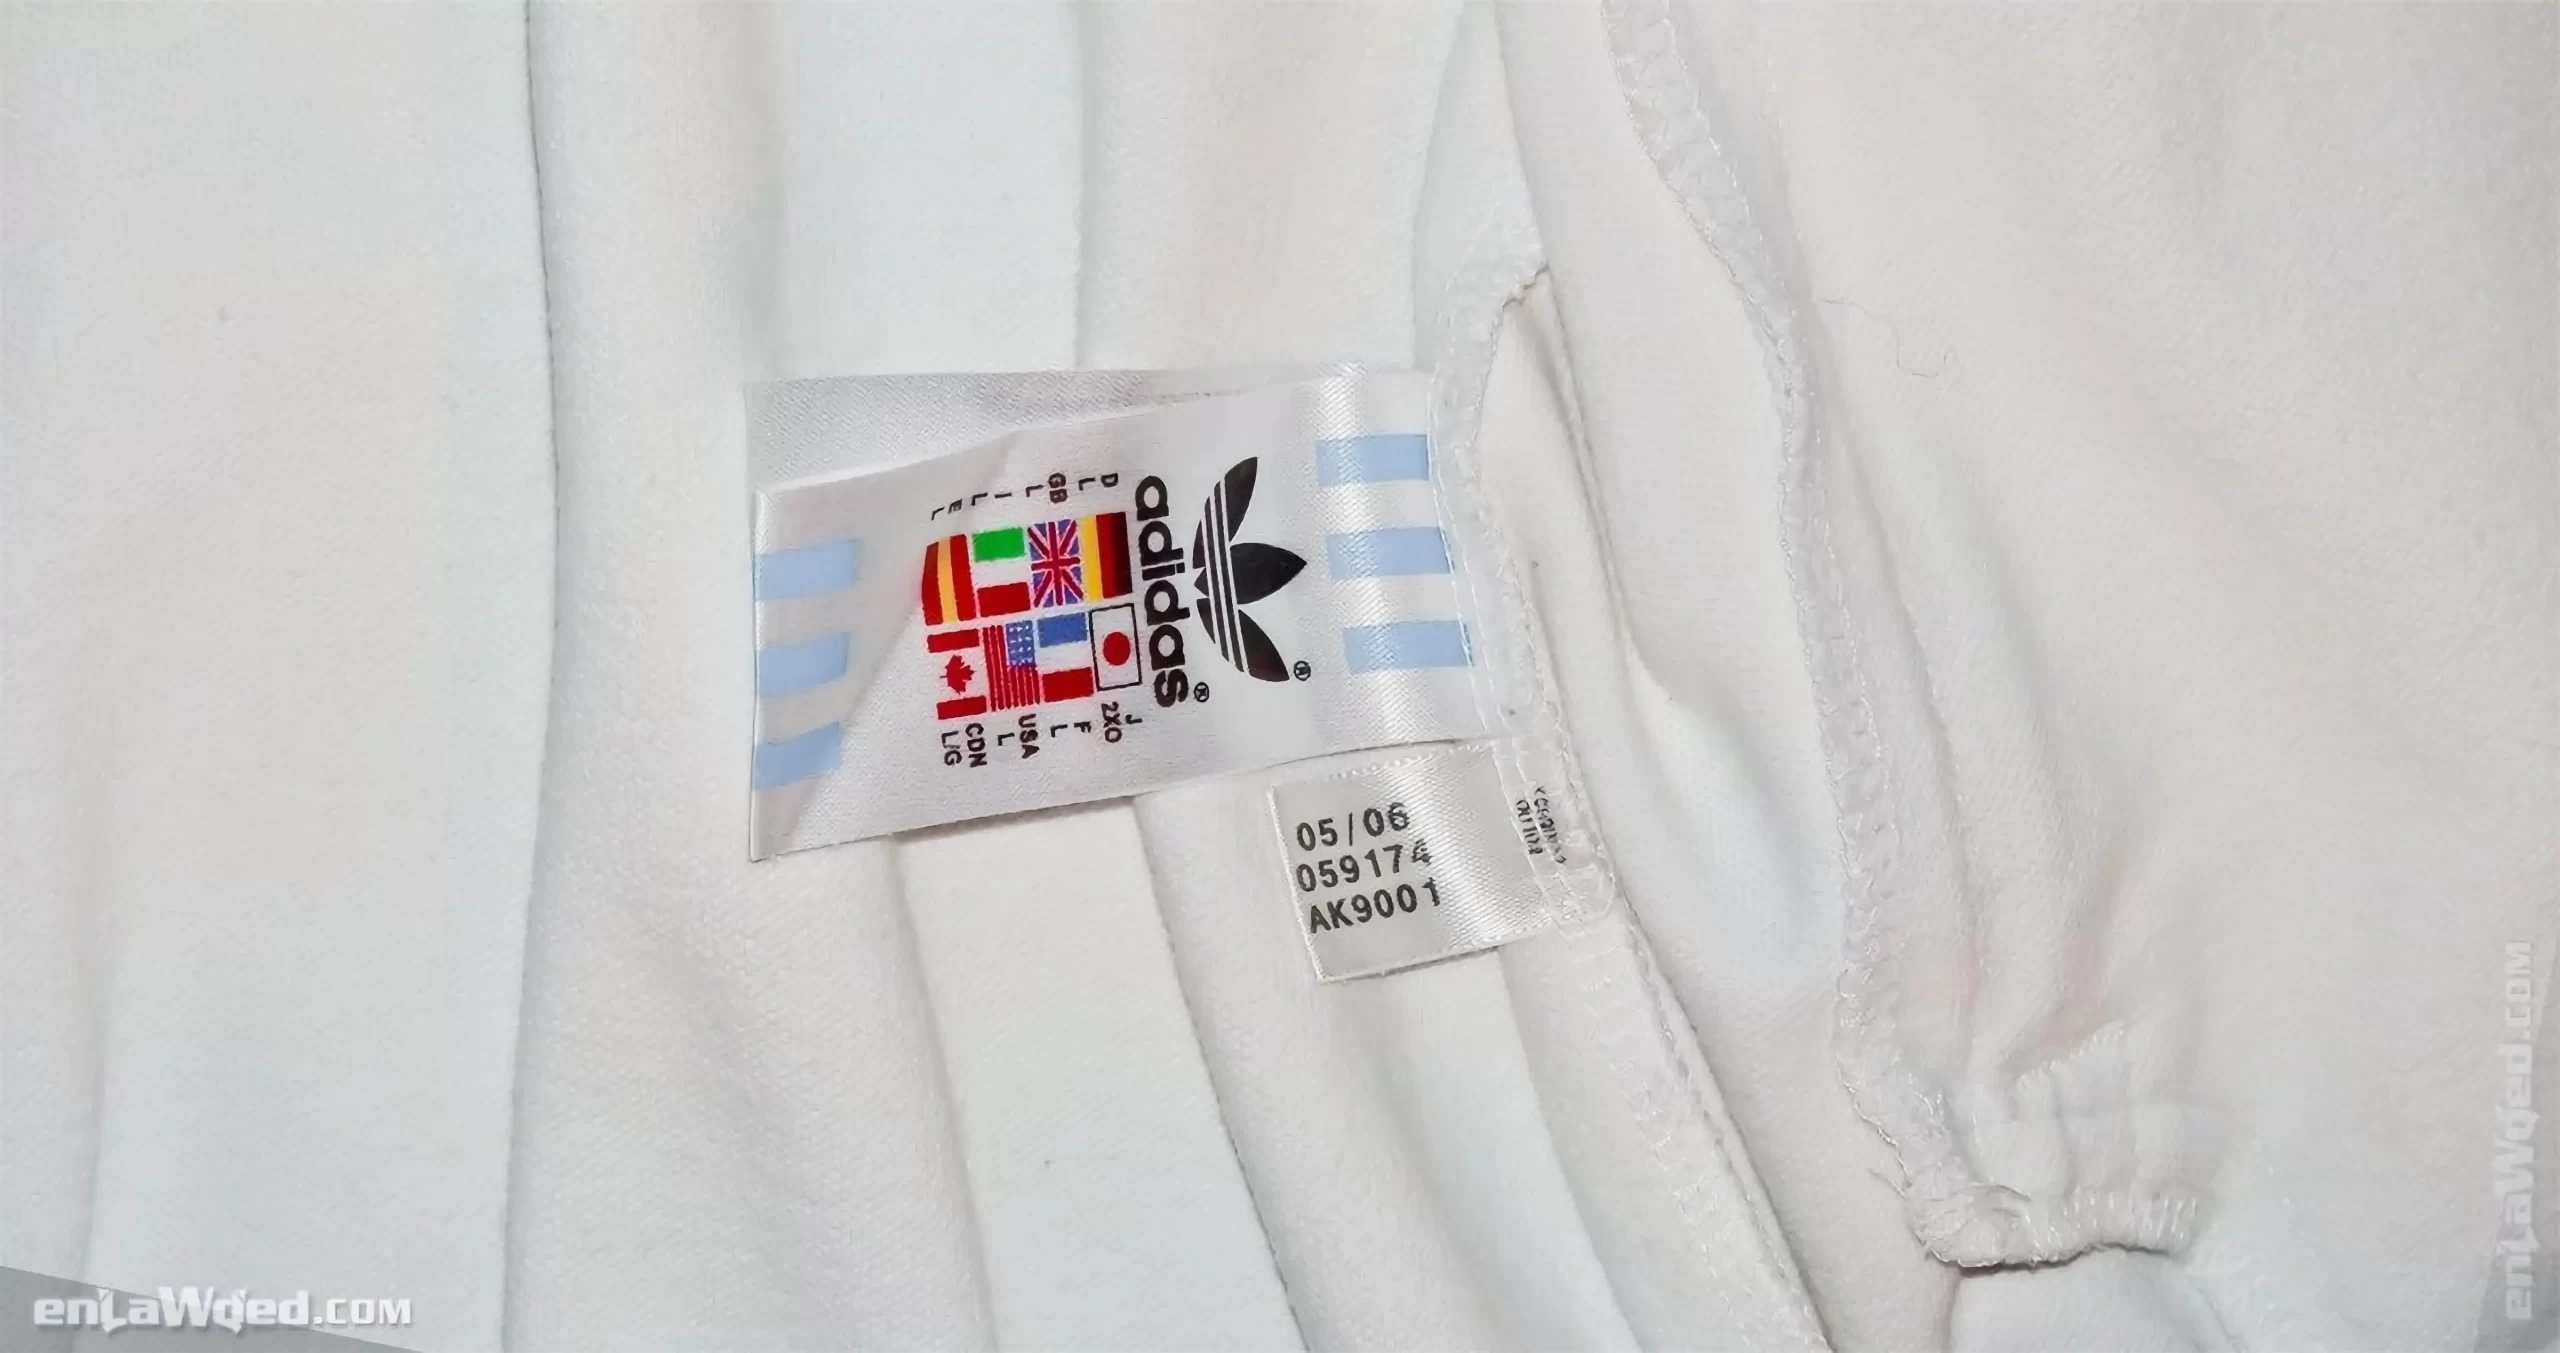 Adidas tag of the London jacket, with the month and year of fabrication: 05/2006